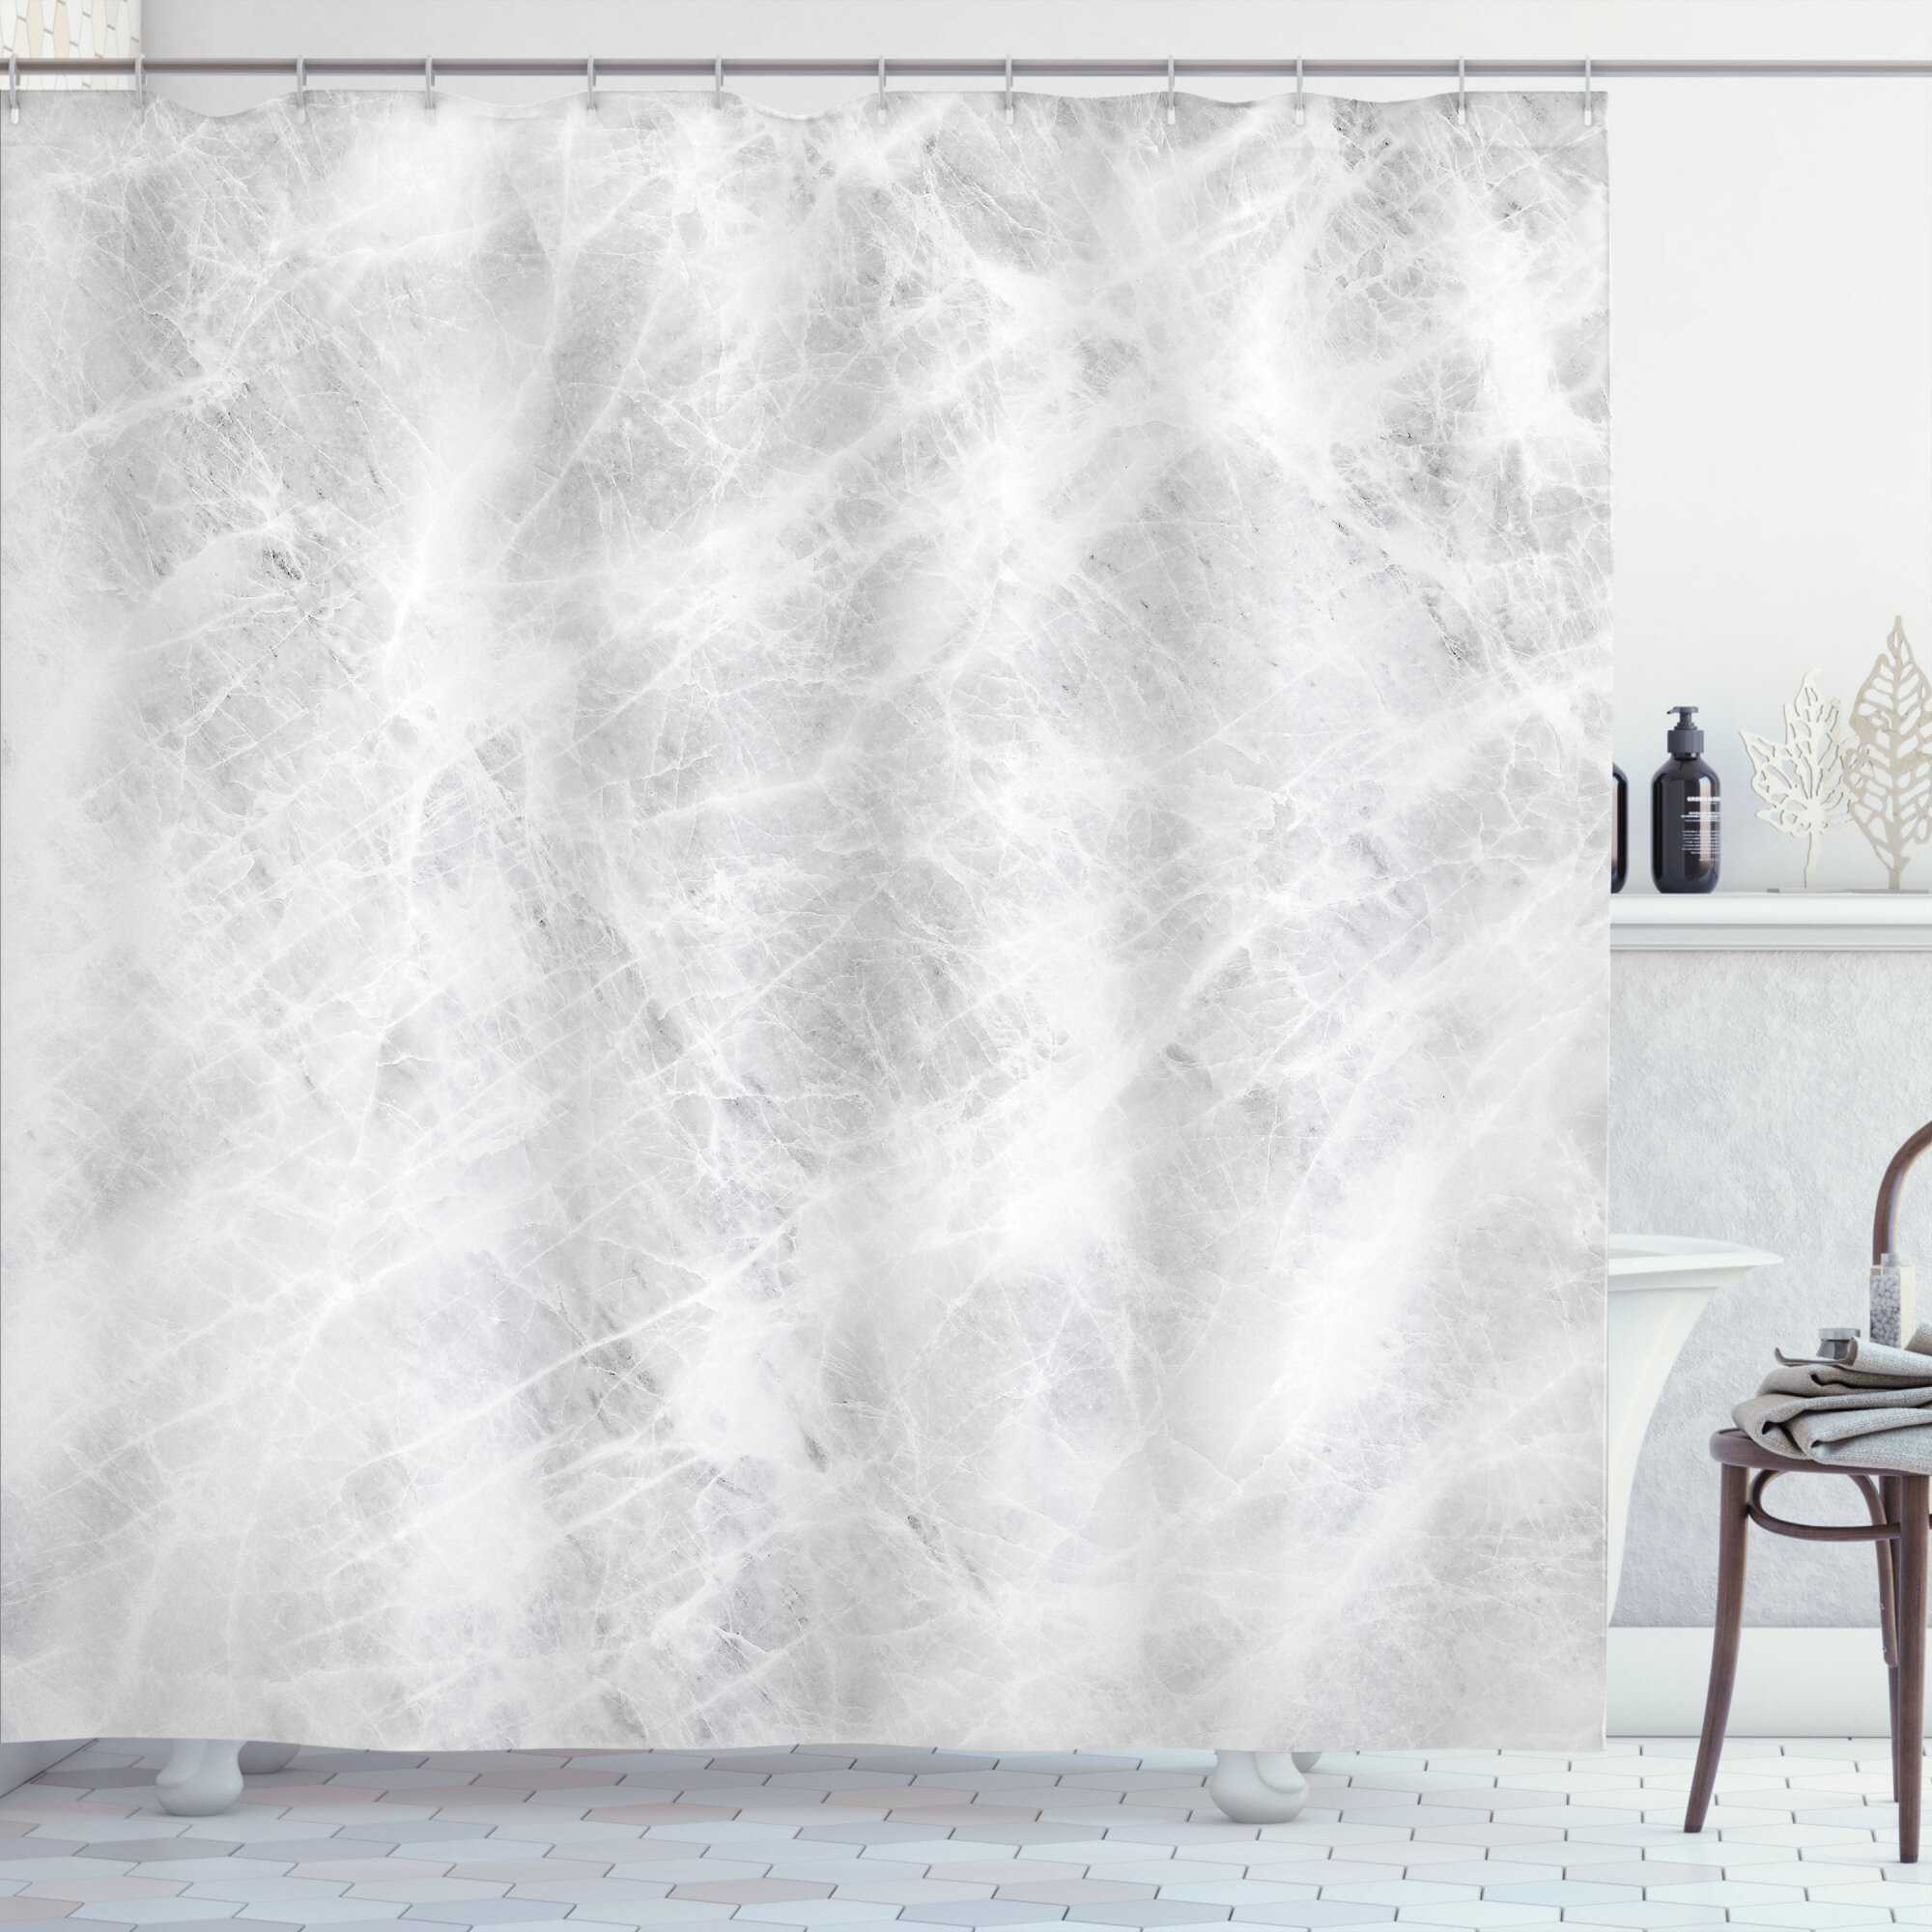 Marble Shower Curtain Set + Hooks East Urban Home Size: 70 H x 69 W